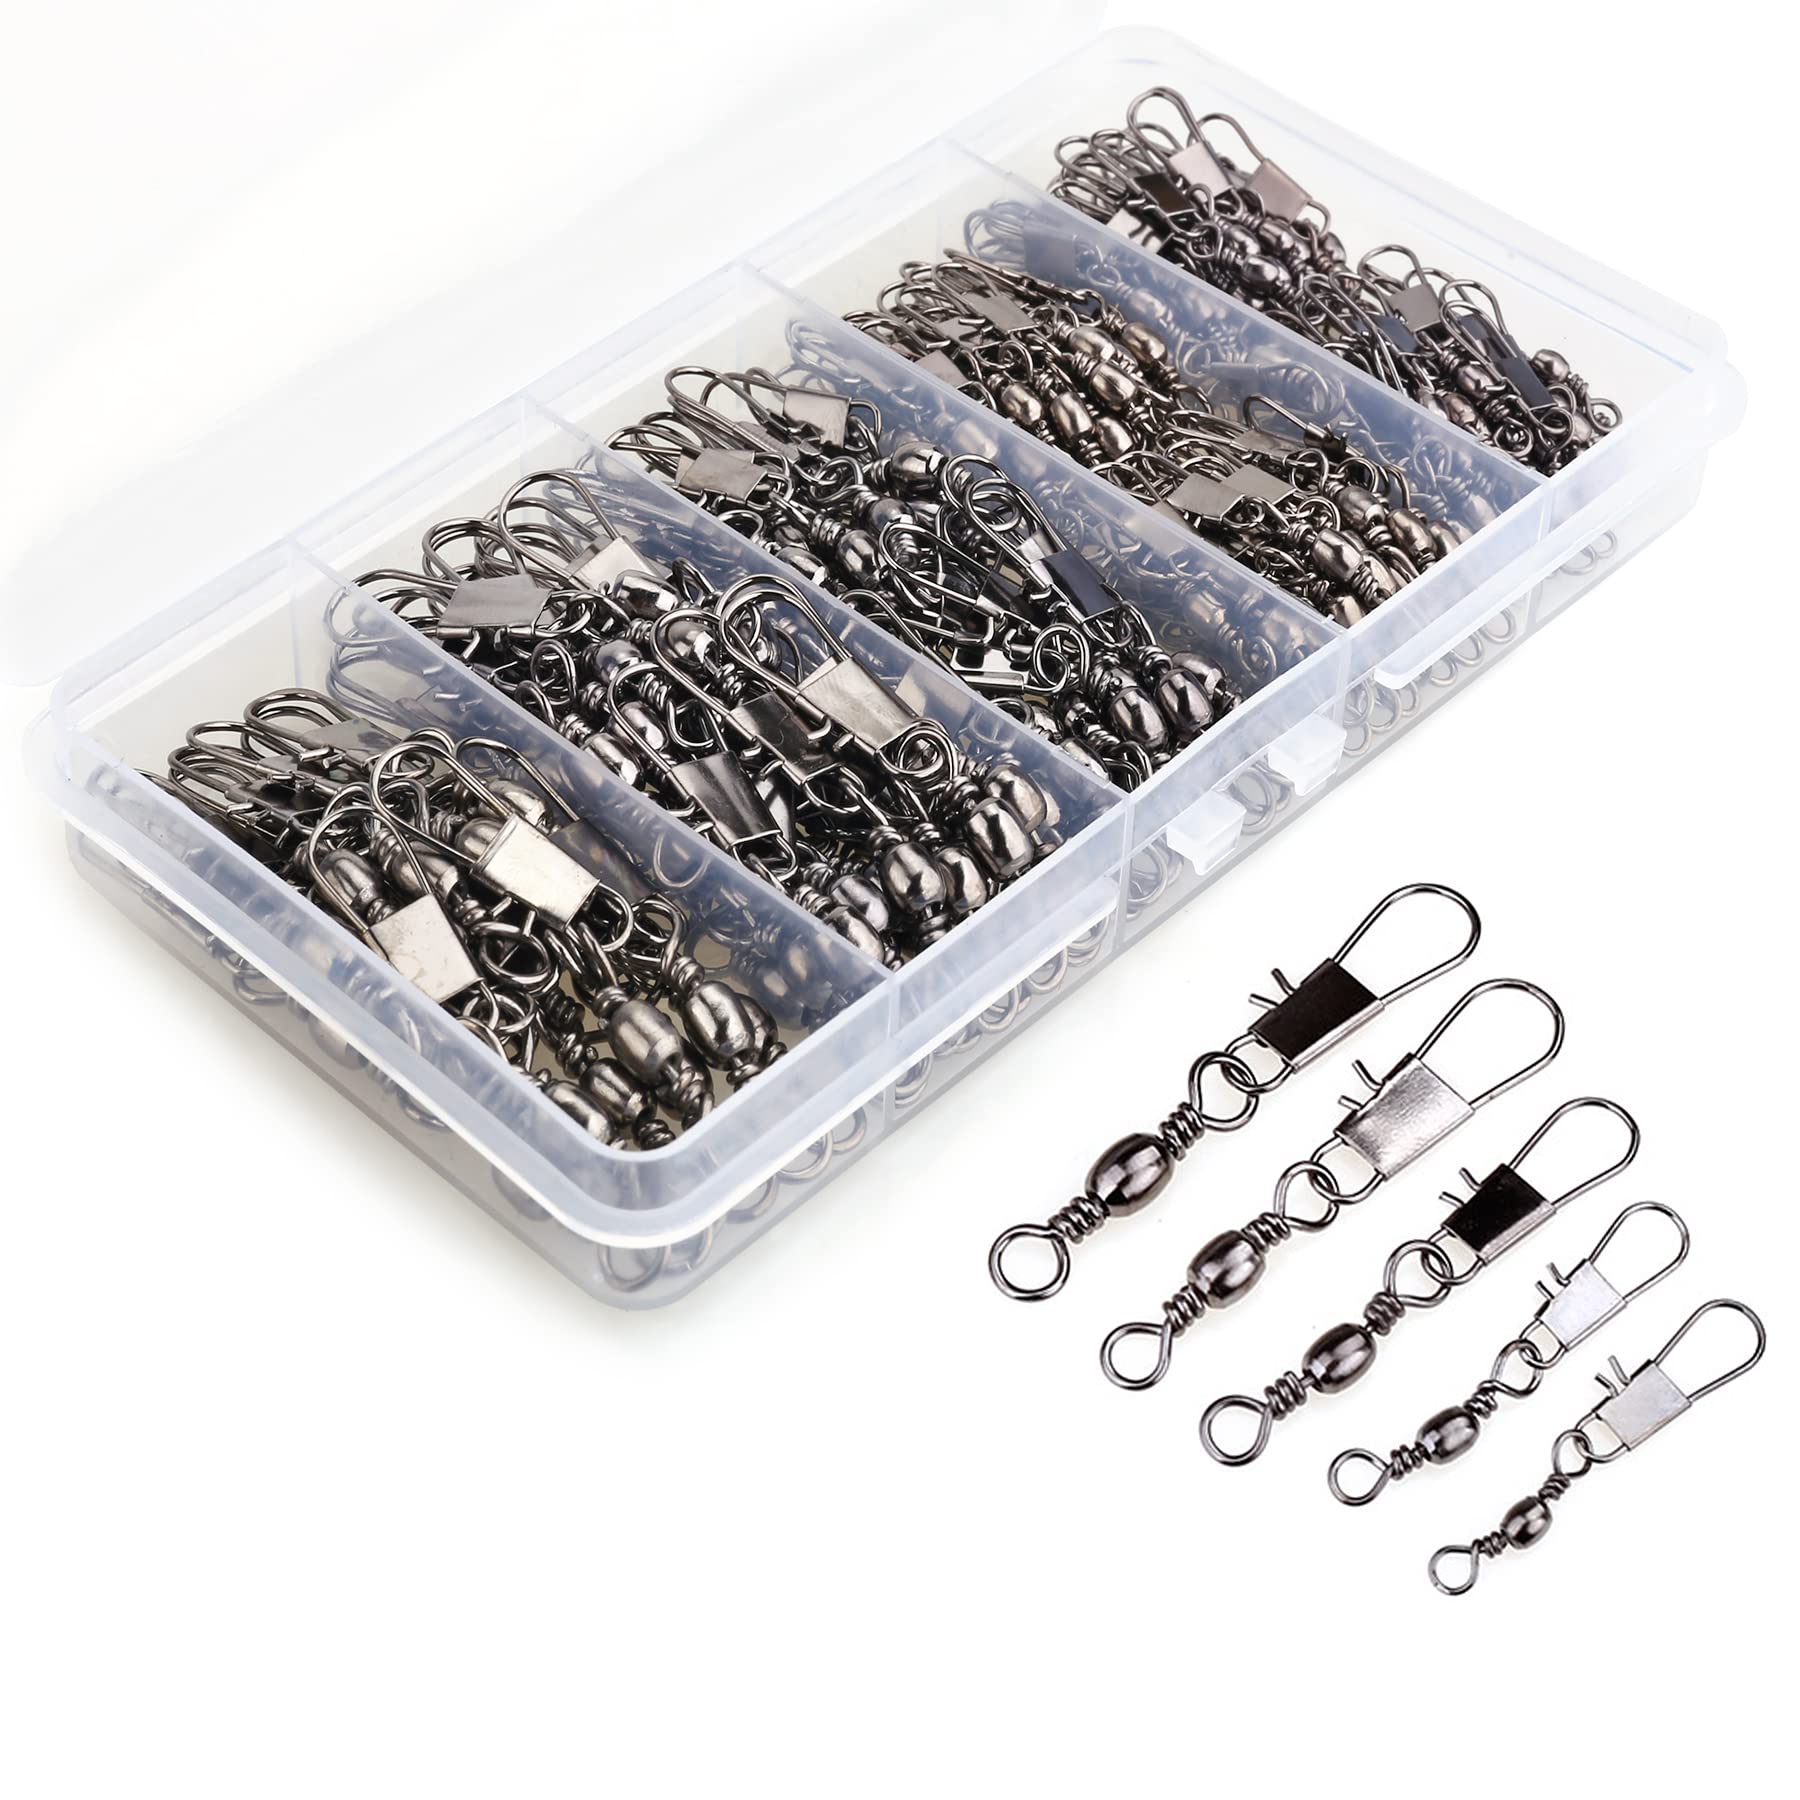 MOBOREST 200PCS Barrel Snap Swivel Fishing Accessories, Premium Fishing  Gear Equipment with Ball Bearing Swivels Snaps